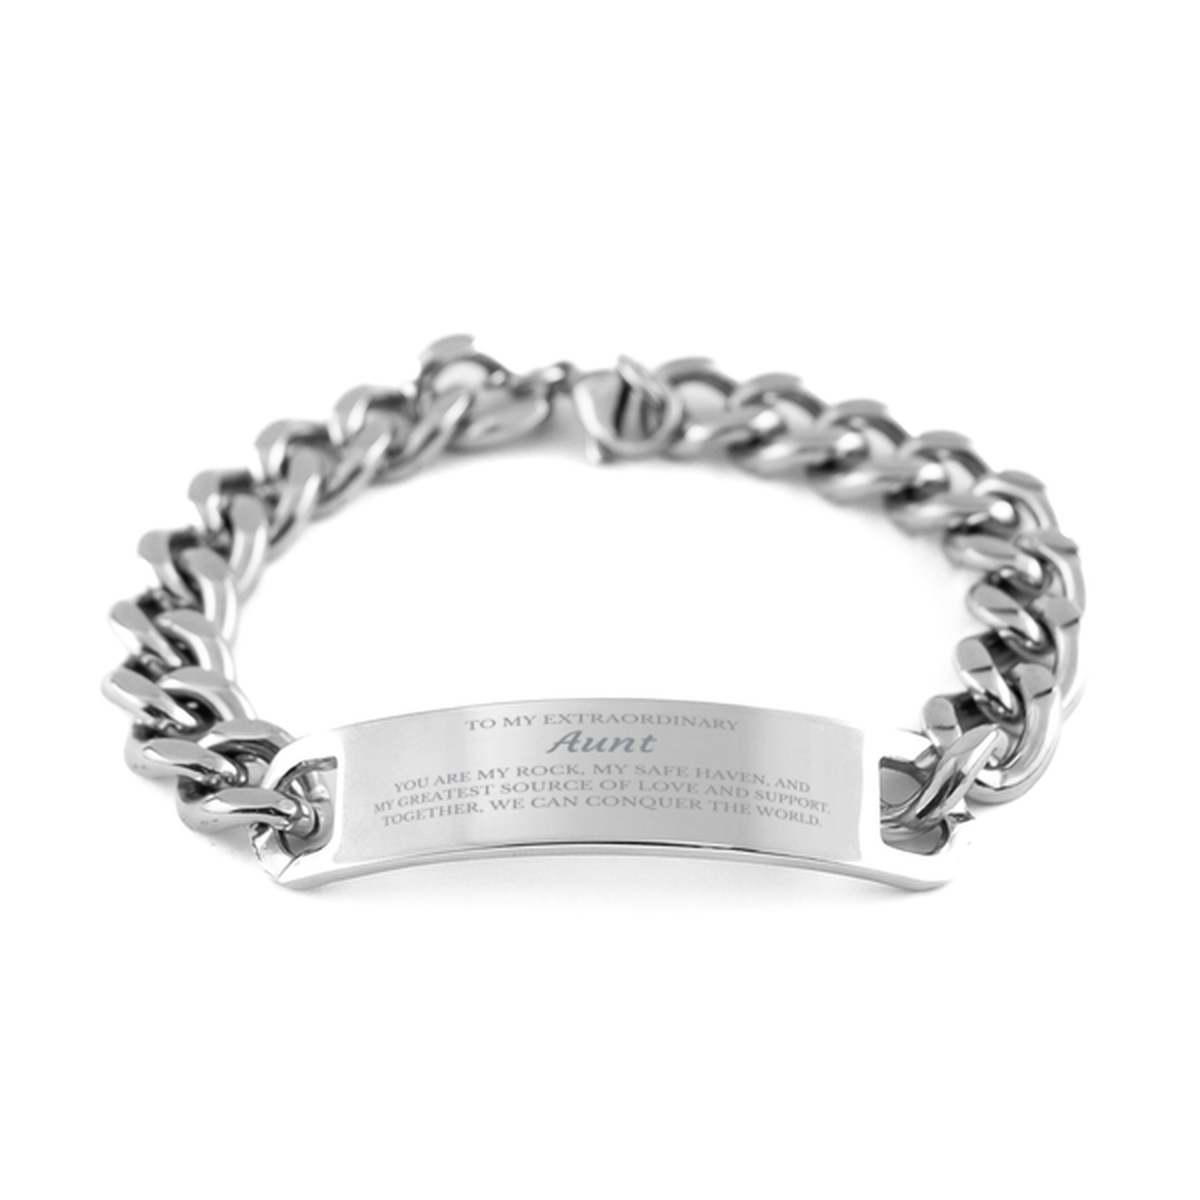 To My Extraordinary Aunt Gifts, Together, we can conquer the world, Birthday Cuban Chain Stainless Steel Bracelet For Aunt, Christmas Gifts For Aunt